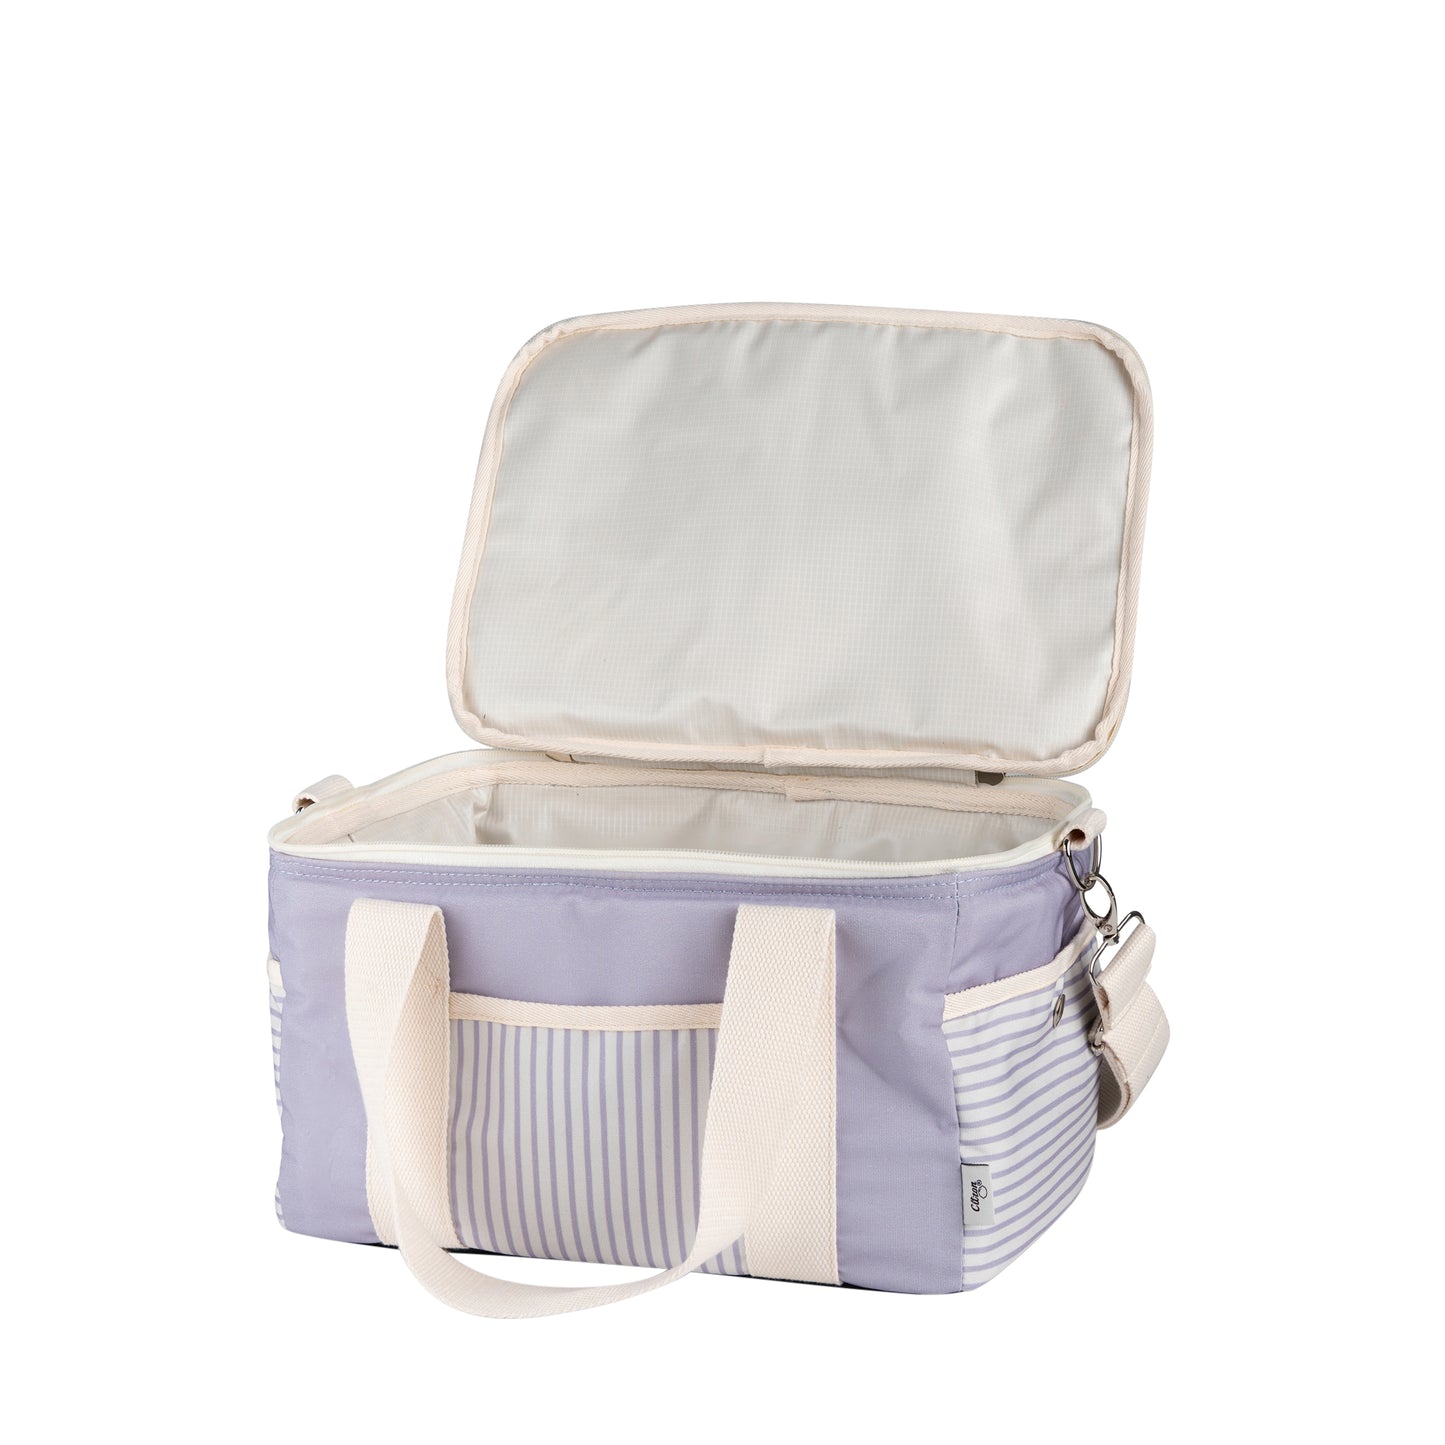 Insulated Picnic Lunchbag - Purple